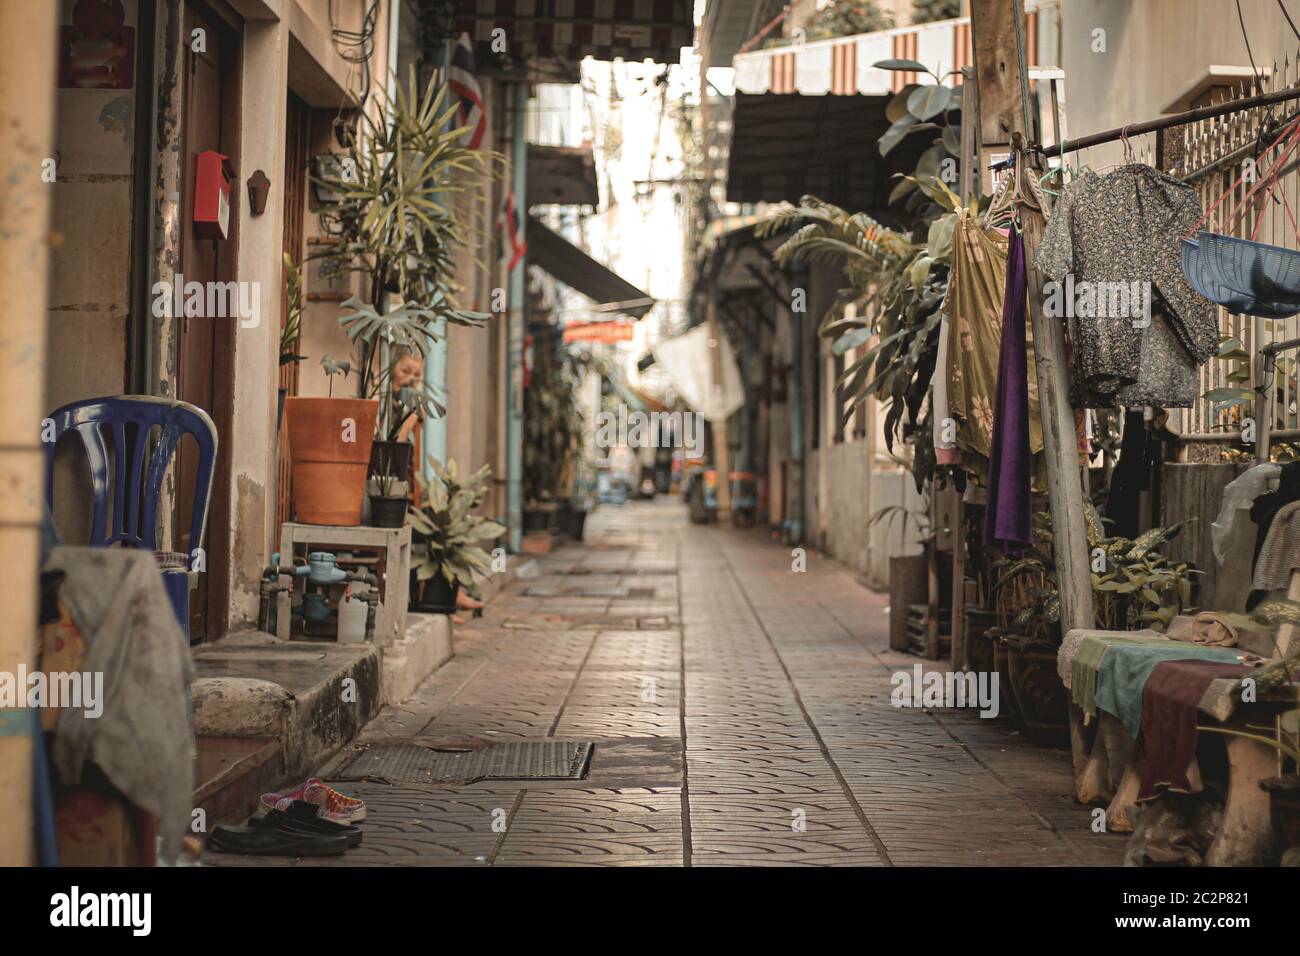 Empty deserted alleyways of Chinatown (Yaowarat Road) in Bangkok, Thailand during the lock down and home quarantine due to the covid-19 pandemic showi Stock Photo